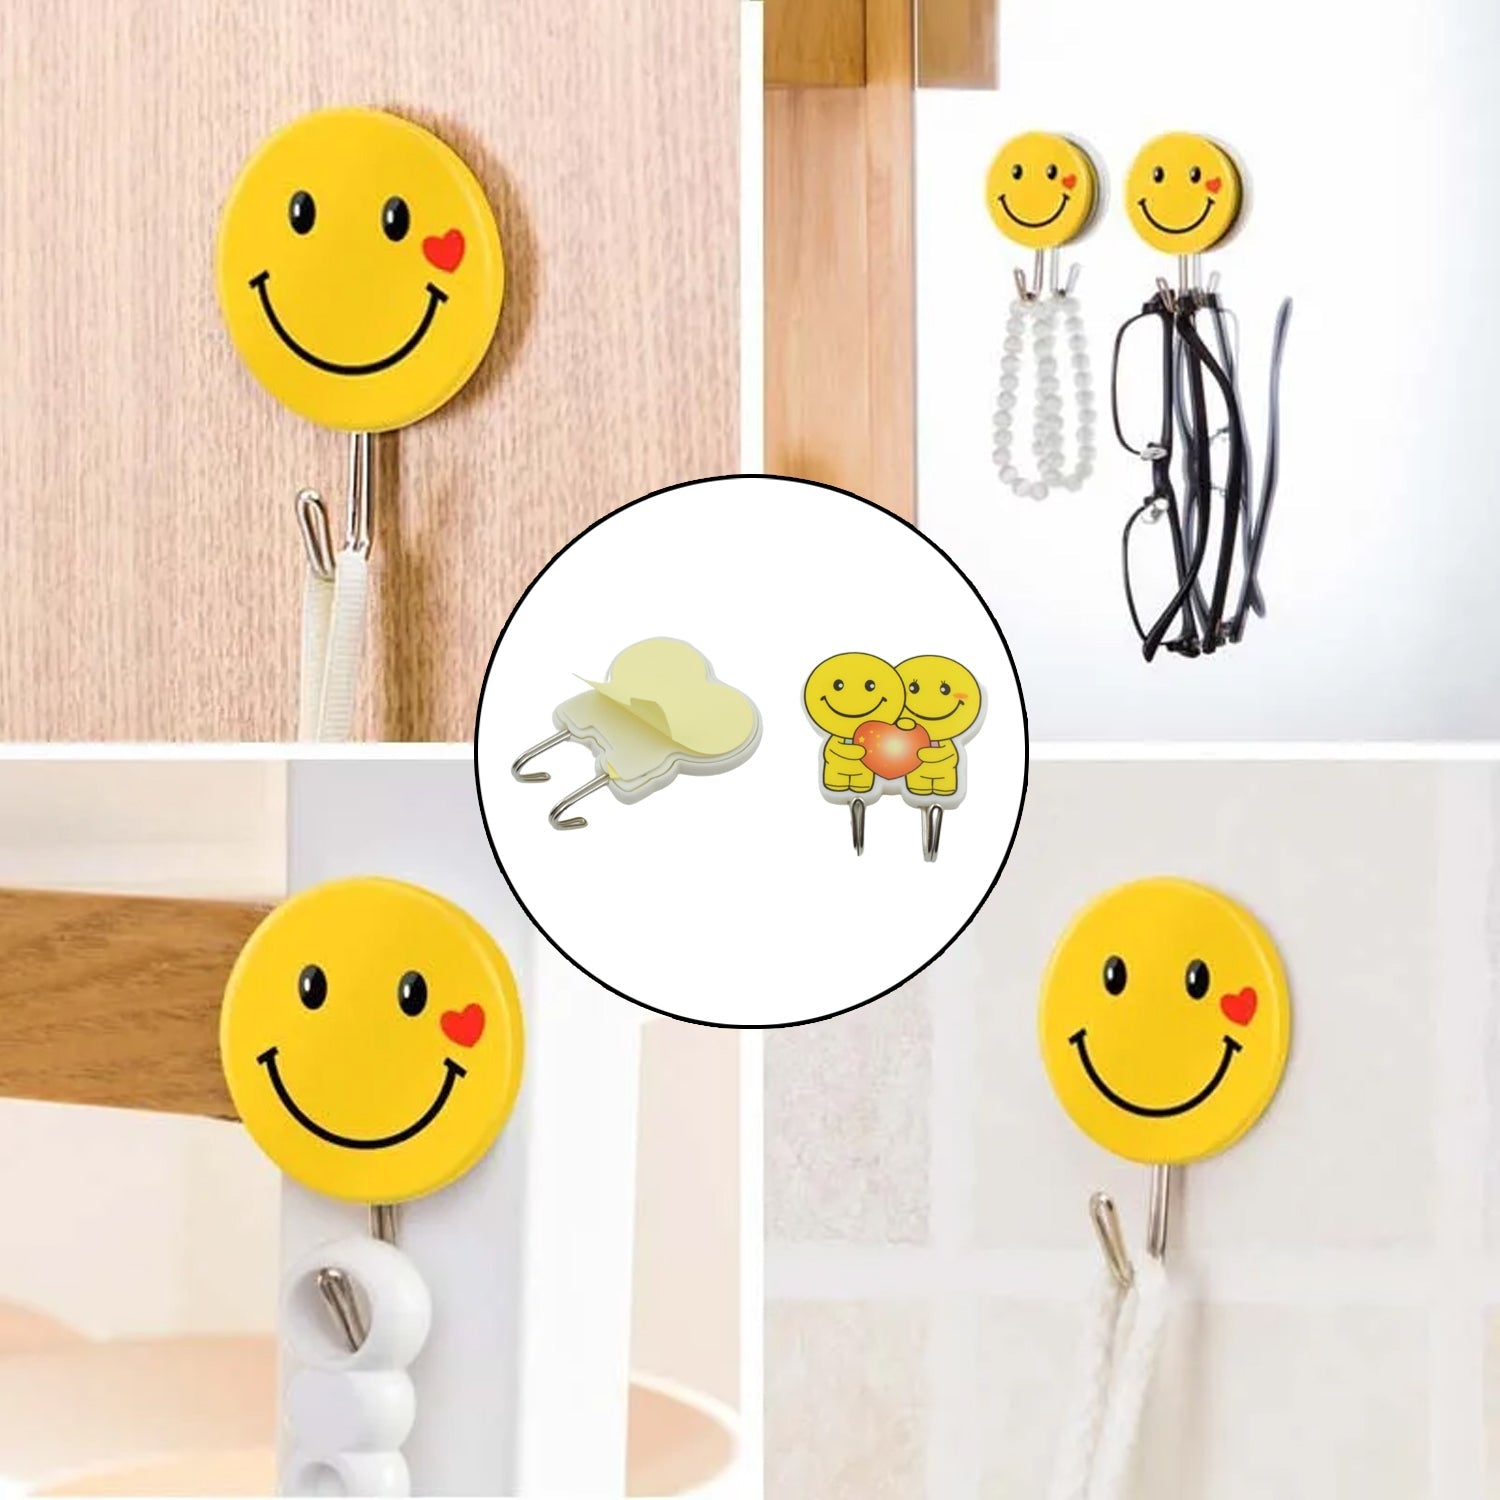 Multipurpose Strong Hook Self-Adhesive hooks for wall Heavy Plastic Hook, Sticky Hook Household For Home , Decorative Hooks, Bathroom & All Type Wall Use Hook , Suitable for Bathroom, Kitchen, Office (2 Pc Set)